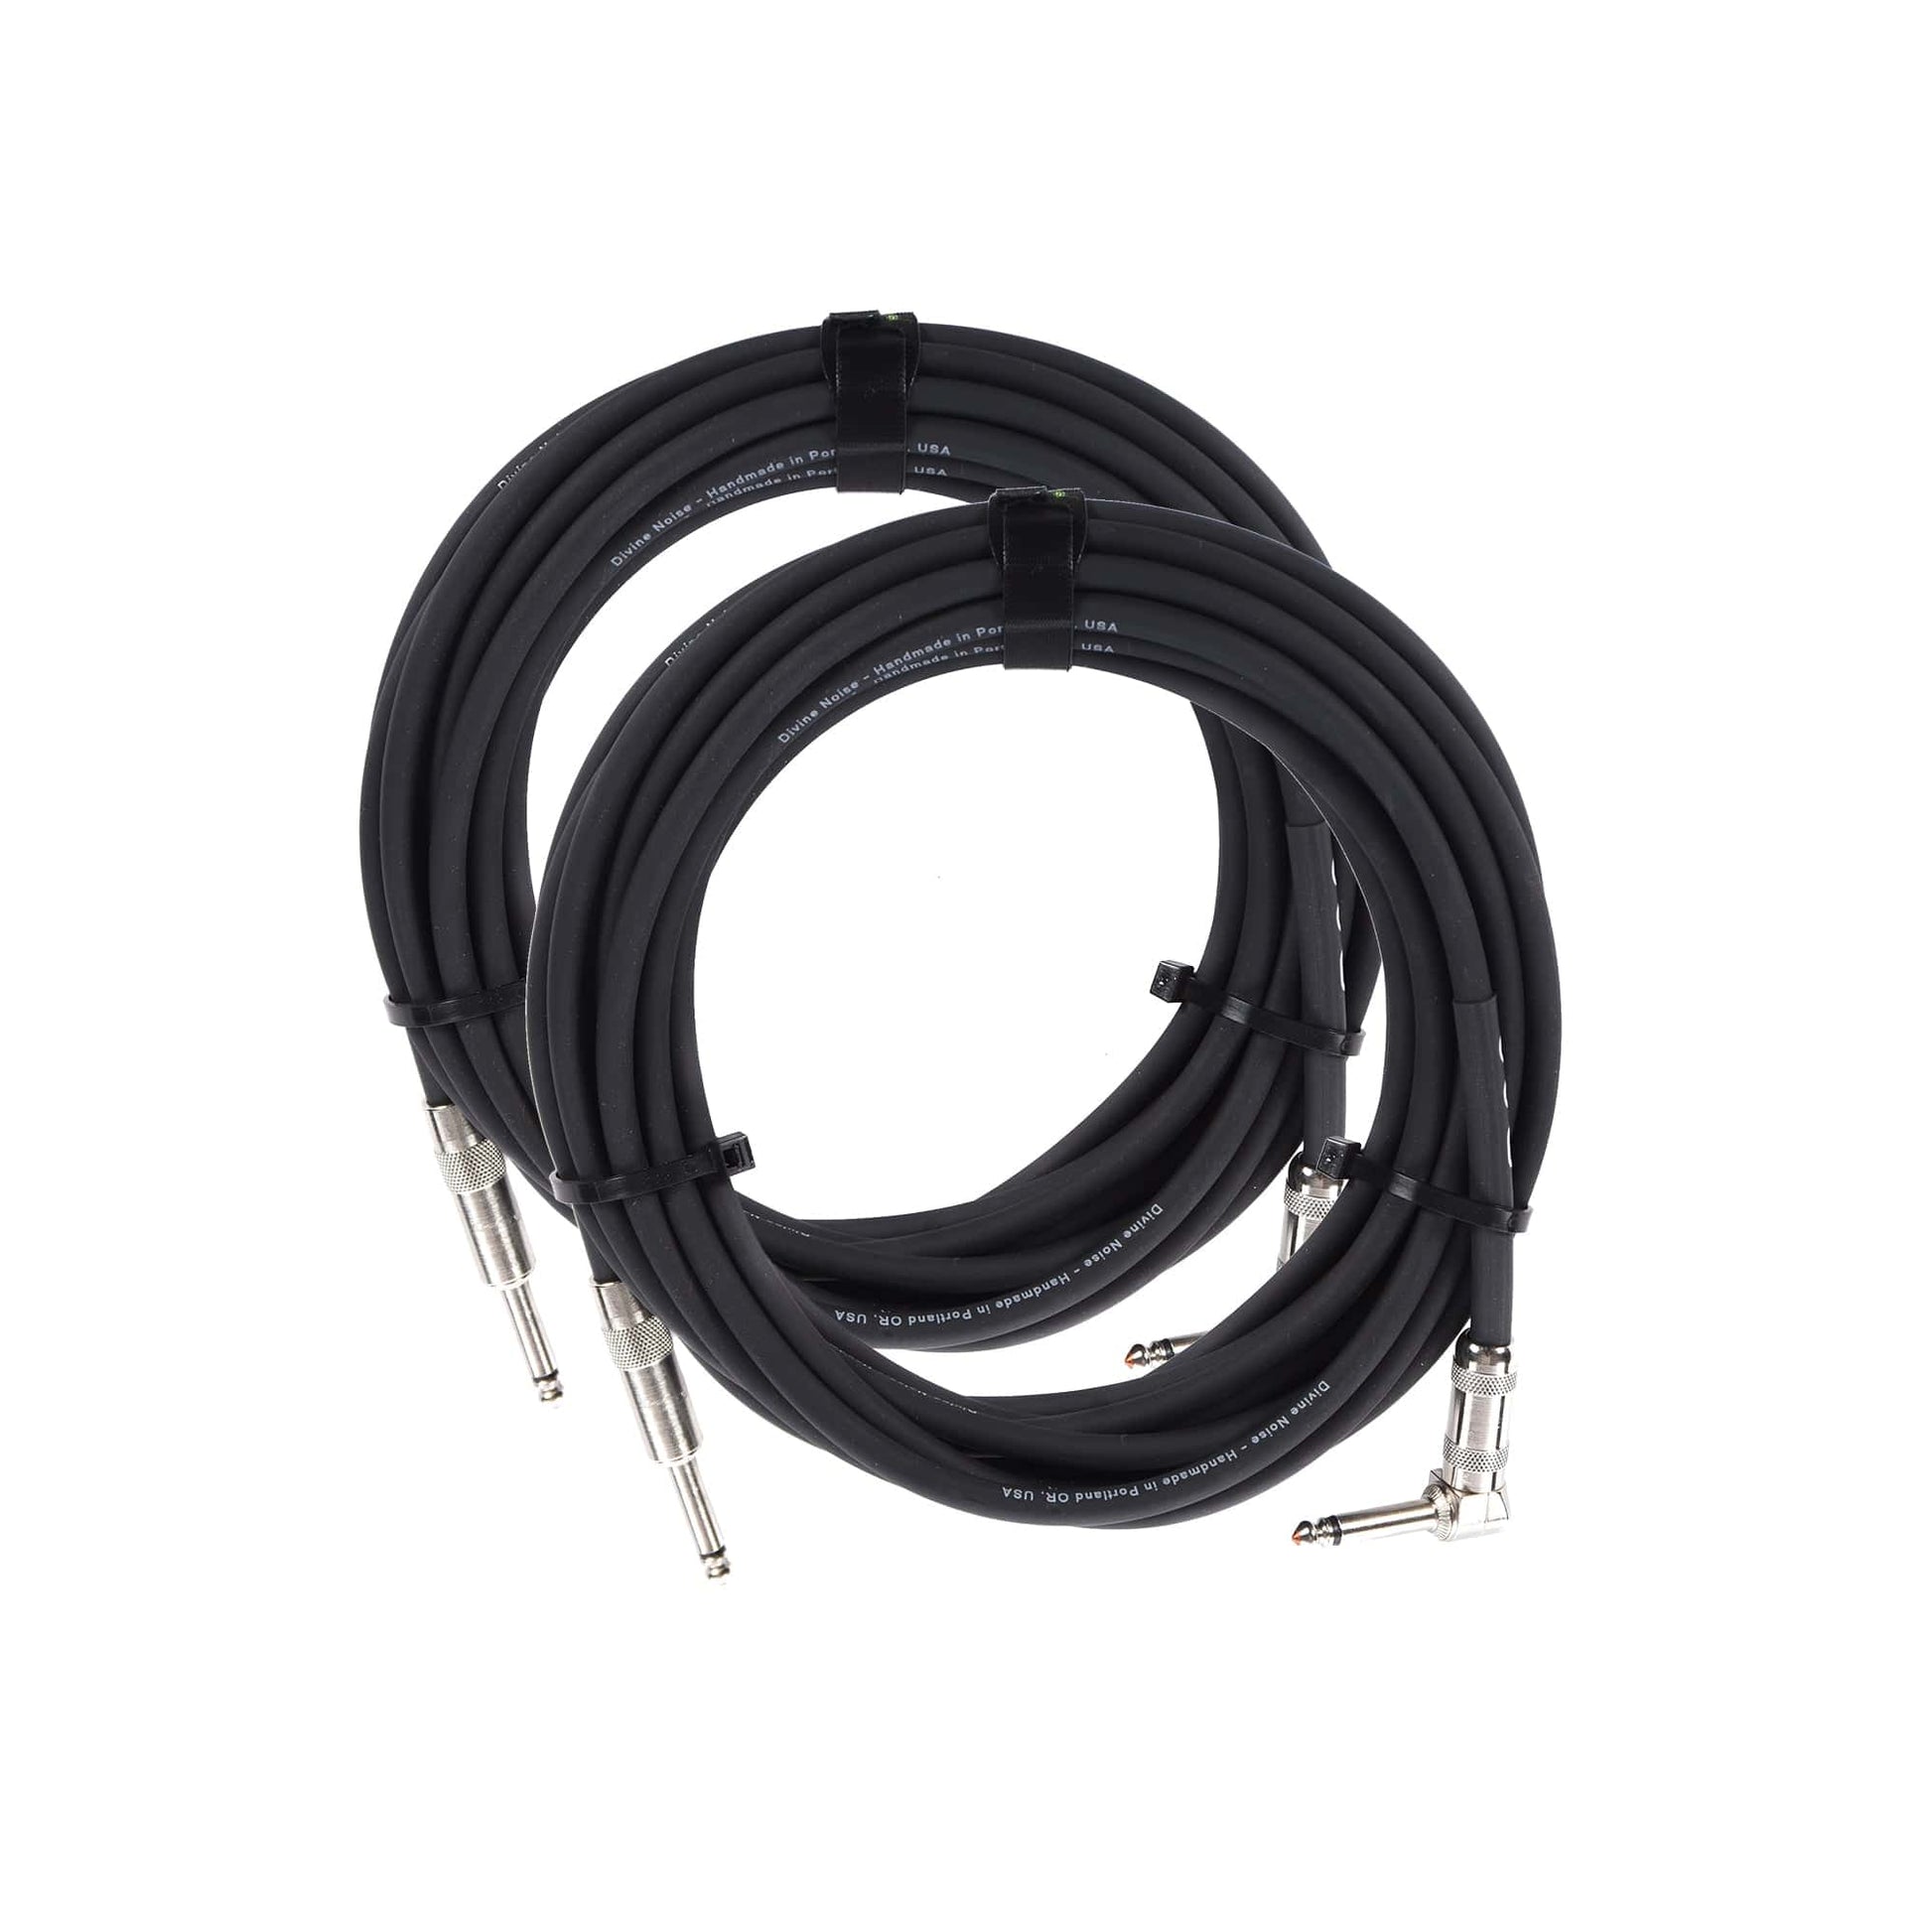 Divine Noise Straight Cable Black 25' Straight/Right Angle 2 Pack Bundle Accessories / Cables